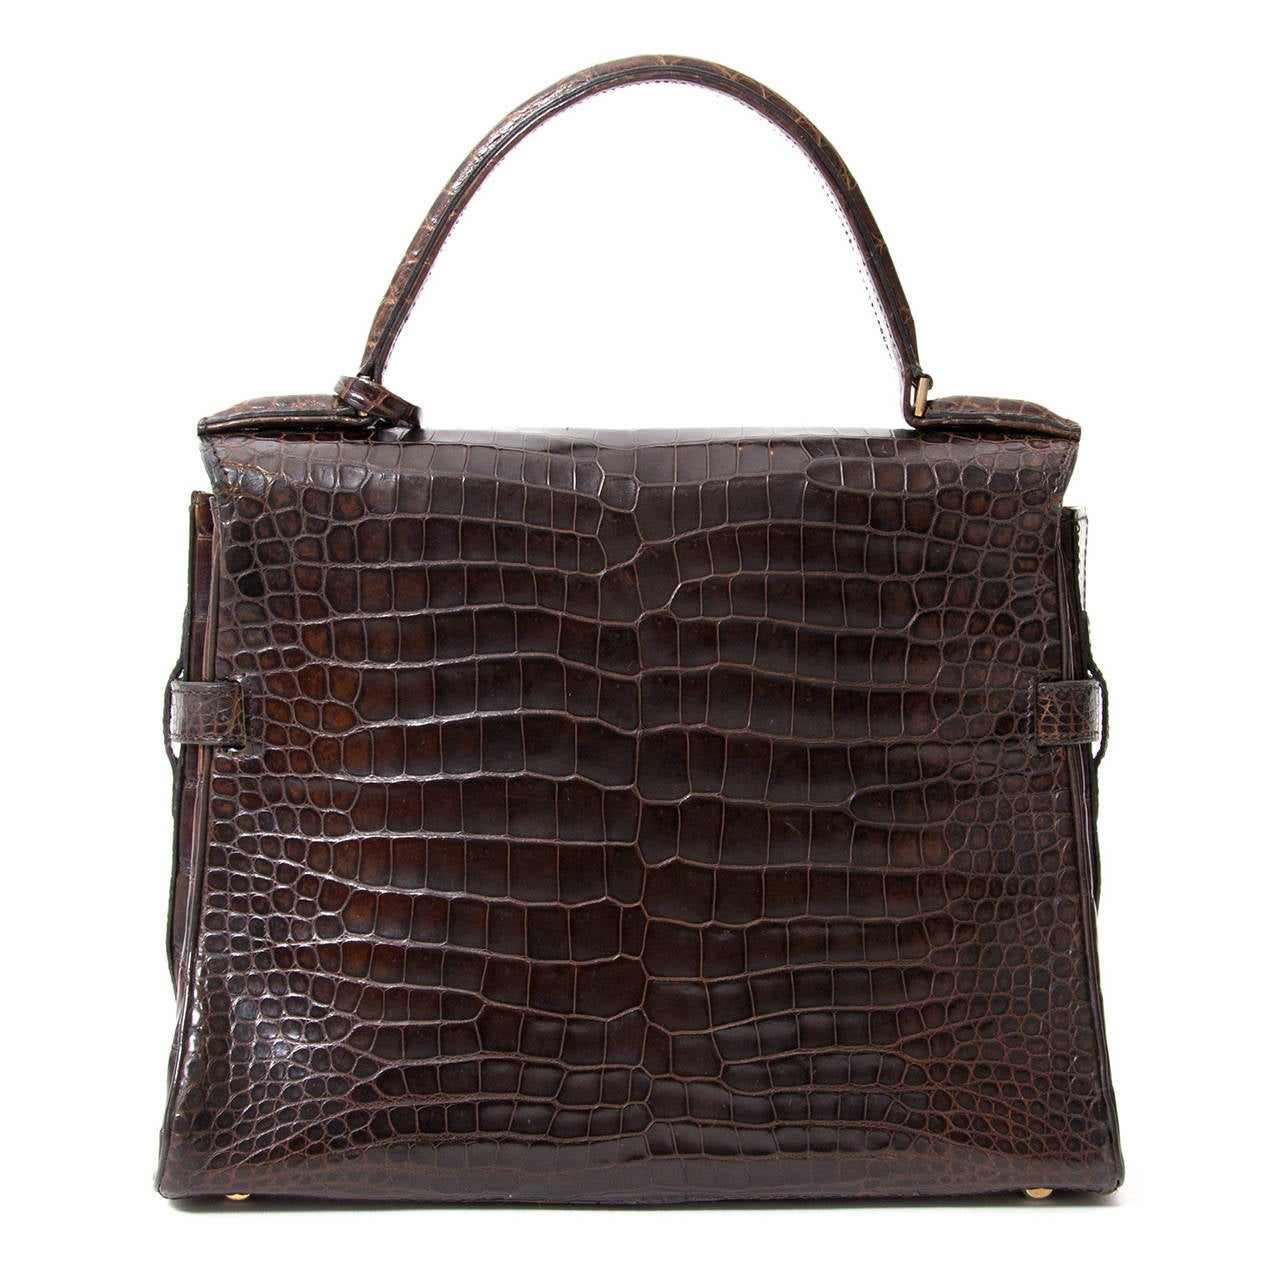 Vintage Delvaux Tempête in beautiful dark brown crocodile leather. With its statement hardware and geometric shape, this beauty is one of Delvaux's most architectural bags. Handcrafted out of the finest crocodile leather , this Tempete crocodile